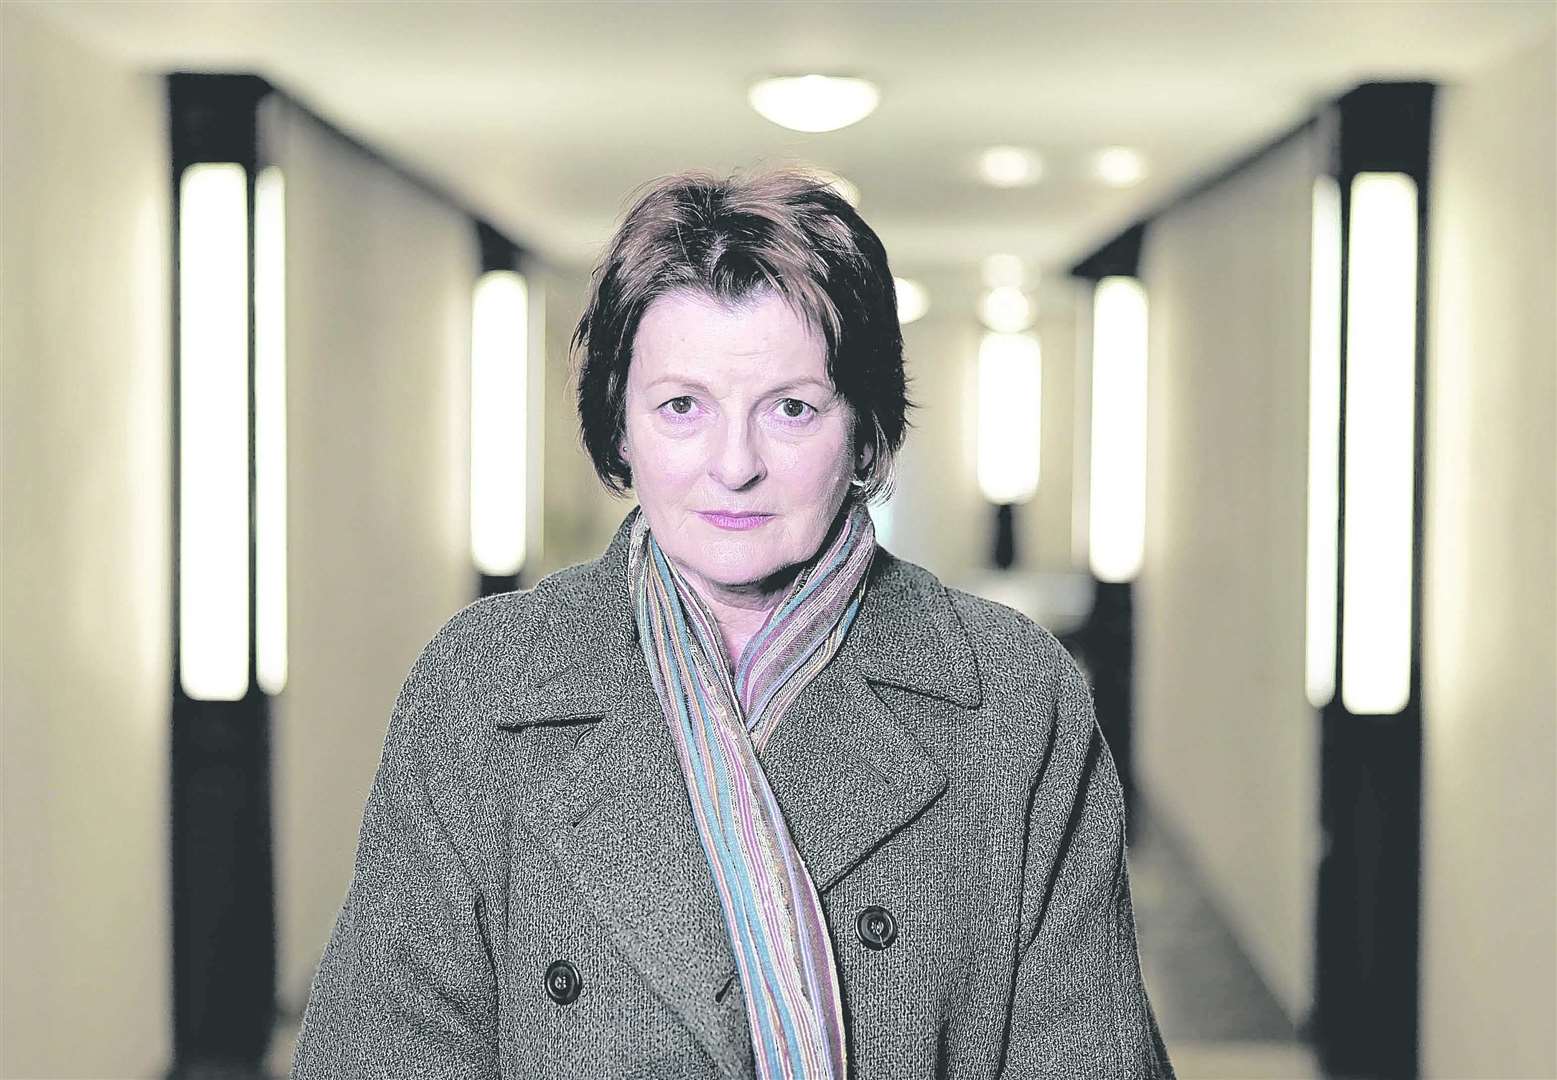 Brenda Blethyn has joined the project